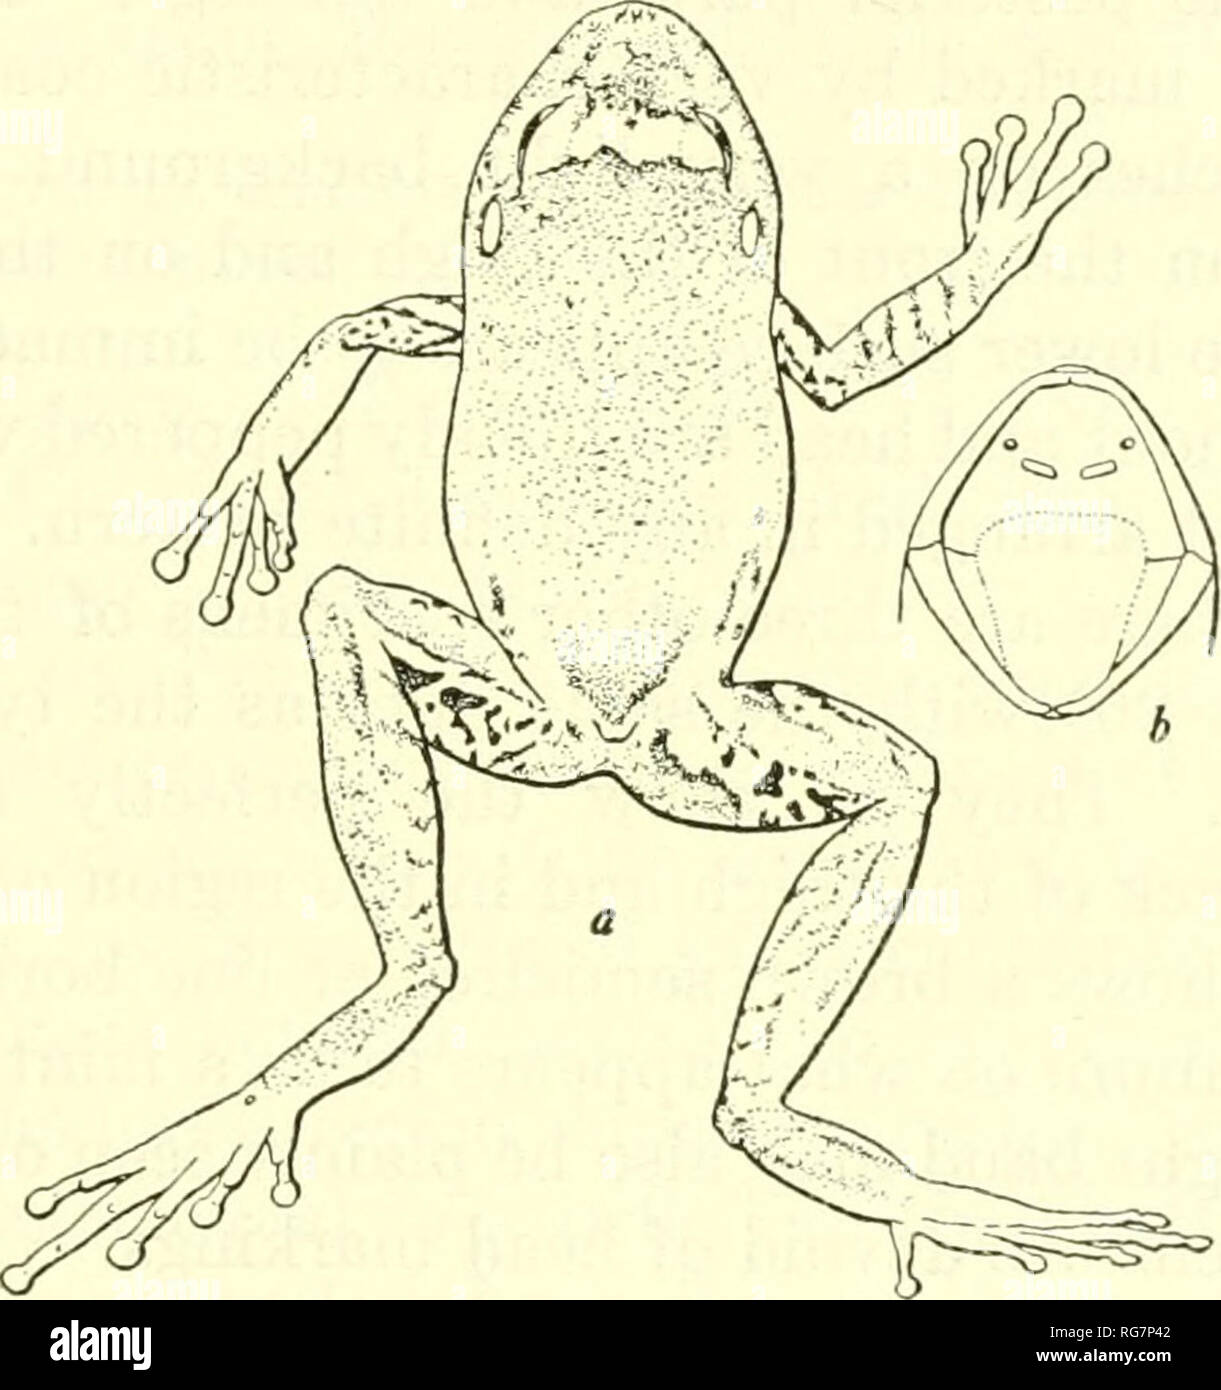 . Bulletin - United States National Museum. Science. THE HERPETOLOGY OF HISPANIOLA 75 Original description.—&quot;Type.—U.S.N.M, No. 72617, an adult from Fonds-des-Negres, Haiti, taken by Dr. A. Wetmore on April 5, 1927, from the nest of a palm-chat, Dulus dominicus, together with two tree-toads, Hyla dominicensis. &quot;Description of the type.—Tongue broad, apparently not emarginate behind; vomerine teeth in two long oblique groups some distance behind the choanae, their outer ends not extending beyond the inner borders of the choanae; head moderate, without ridges; no apparent subgular pouc Stock Photo